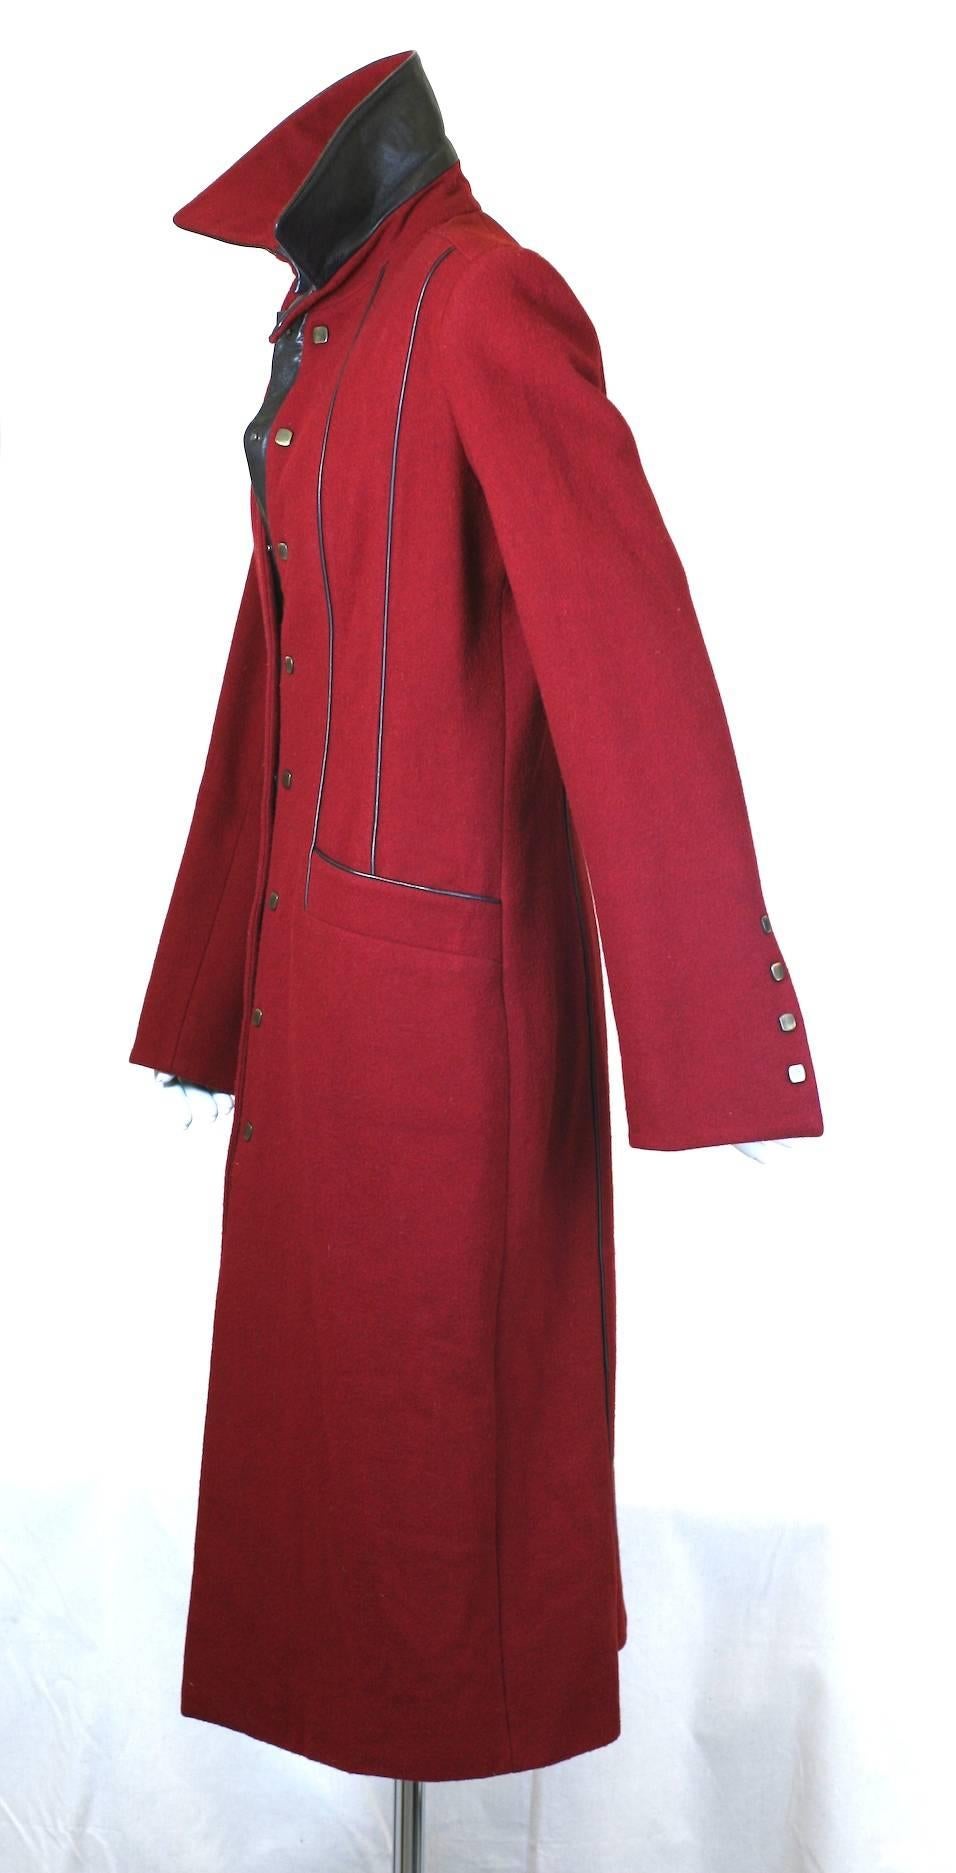 Lou Lou de la Falaise sleek, fitted wool melton coat with wonderful leather trim and detailing. Leather piping along torso and elongated flared sleeve cuffs give this coat a long, lean line.
Black leather is used to contrast the medium weight wine